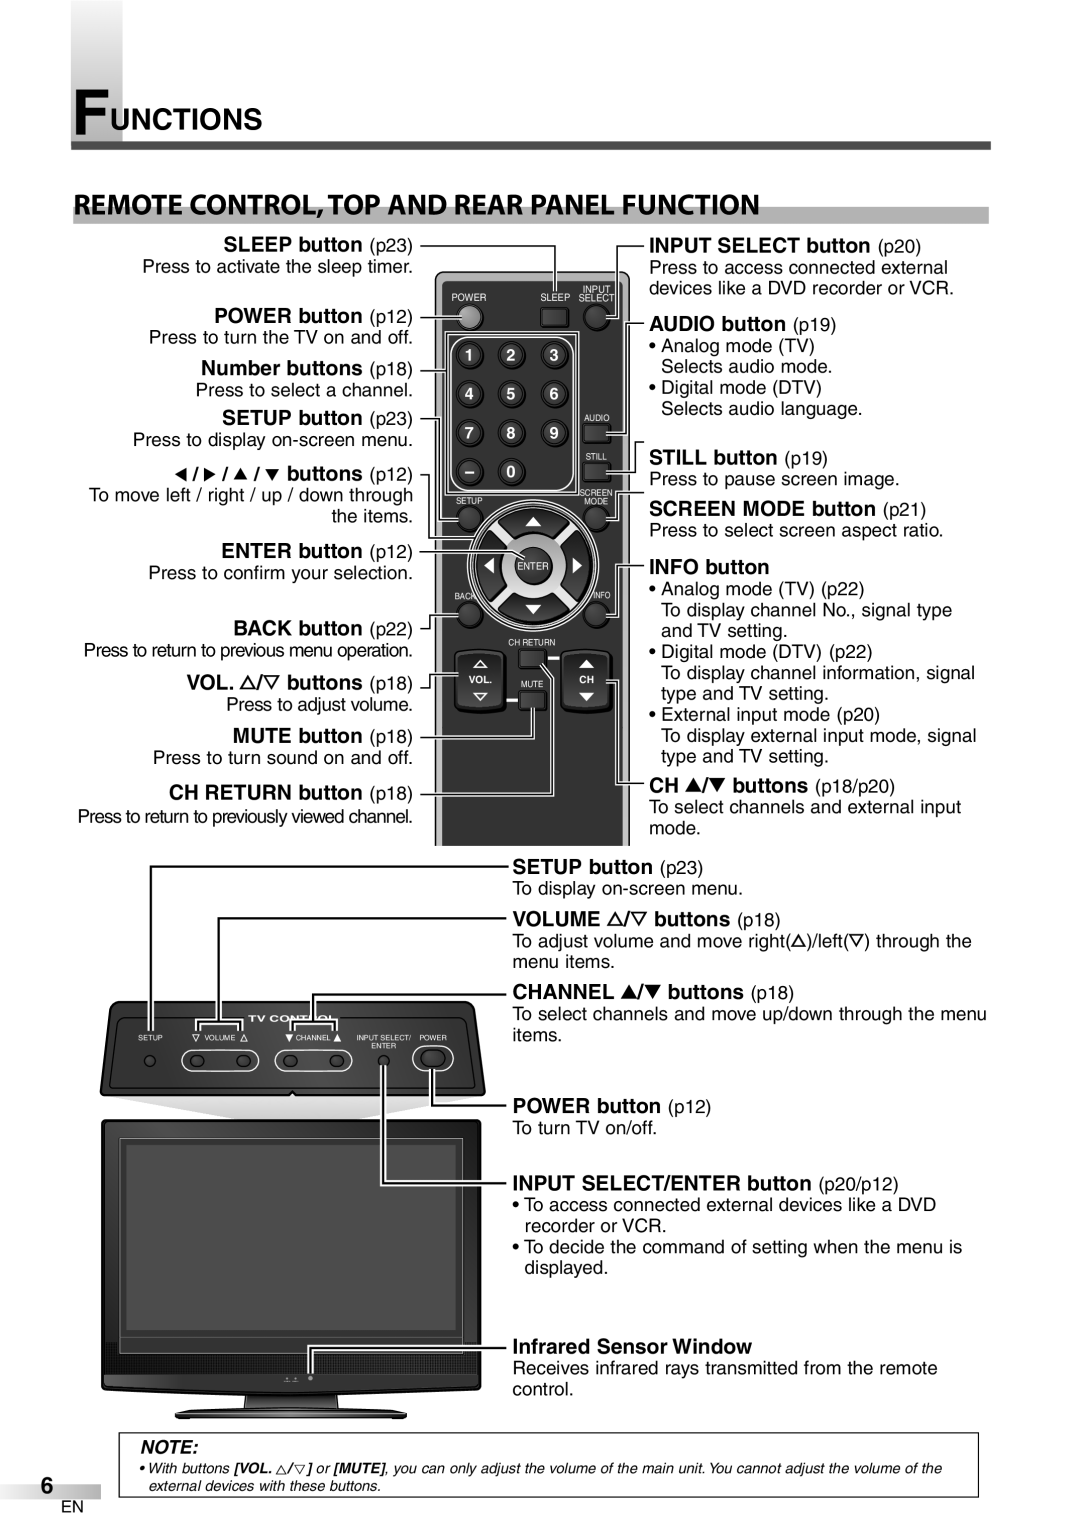 Emerson LC320EM8 owner manual Functions, Remote Control,Top And Rear Panel Function, CHANNEL K/ L buttons p18 